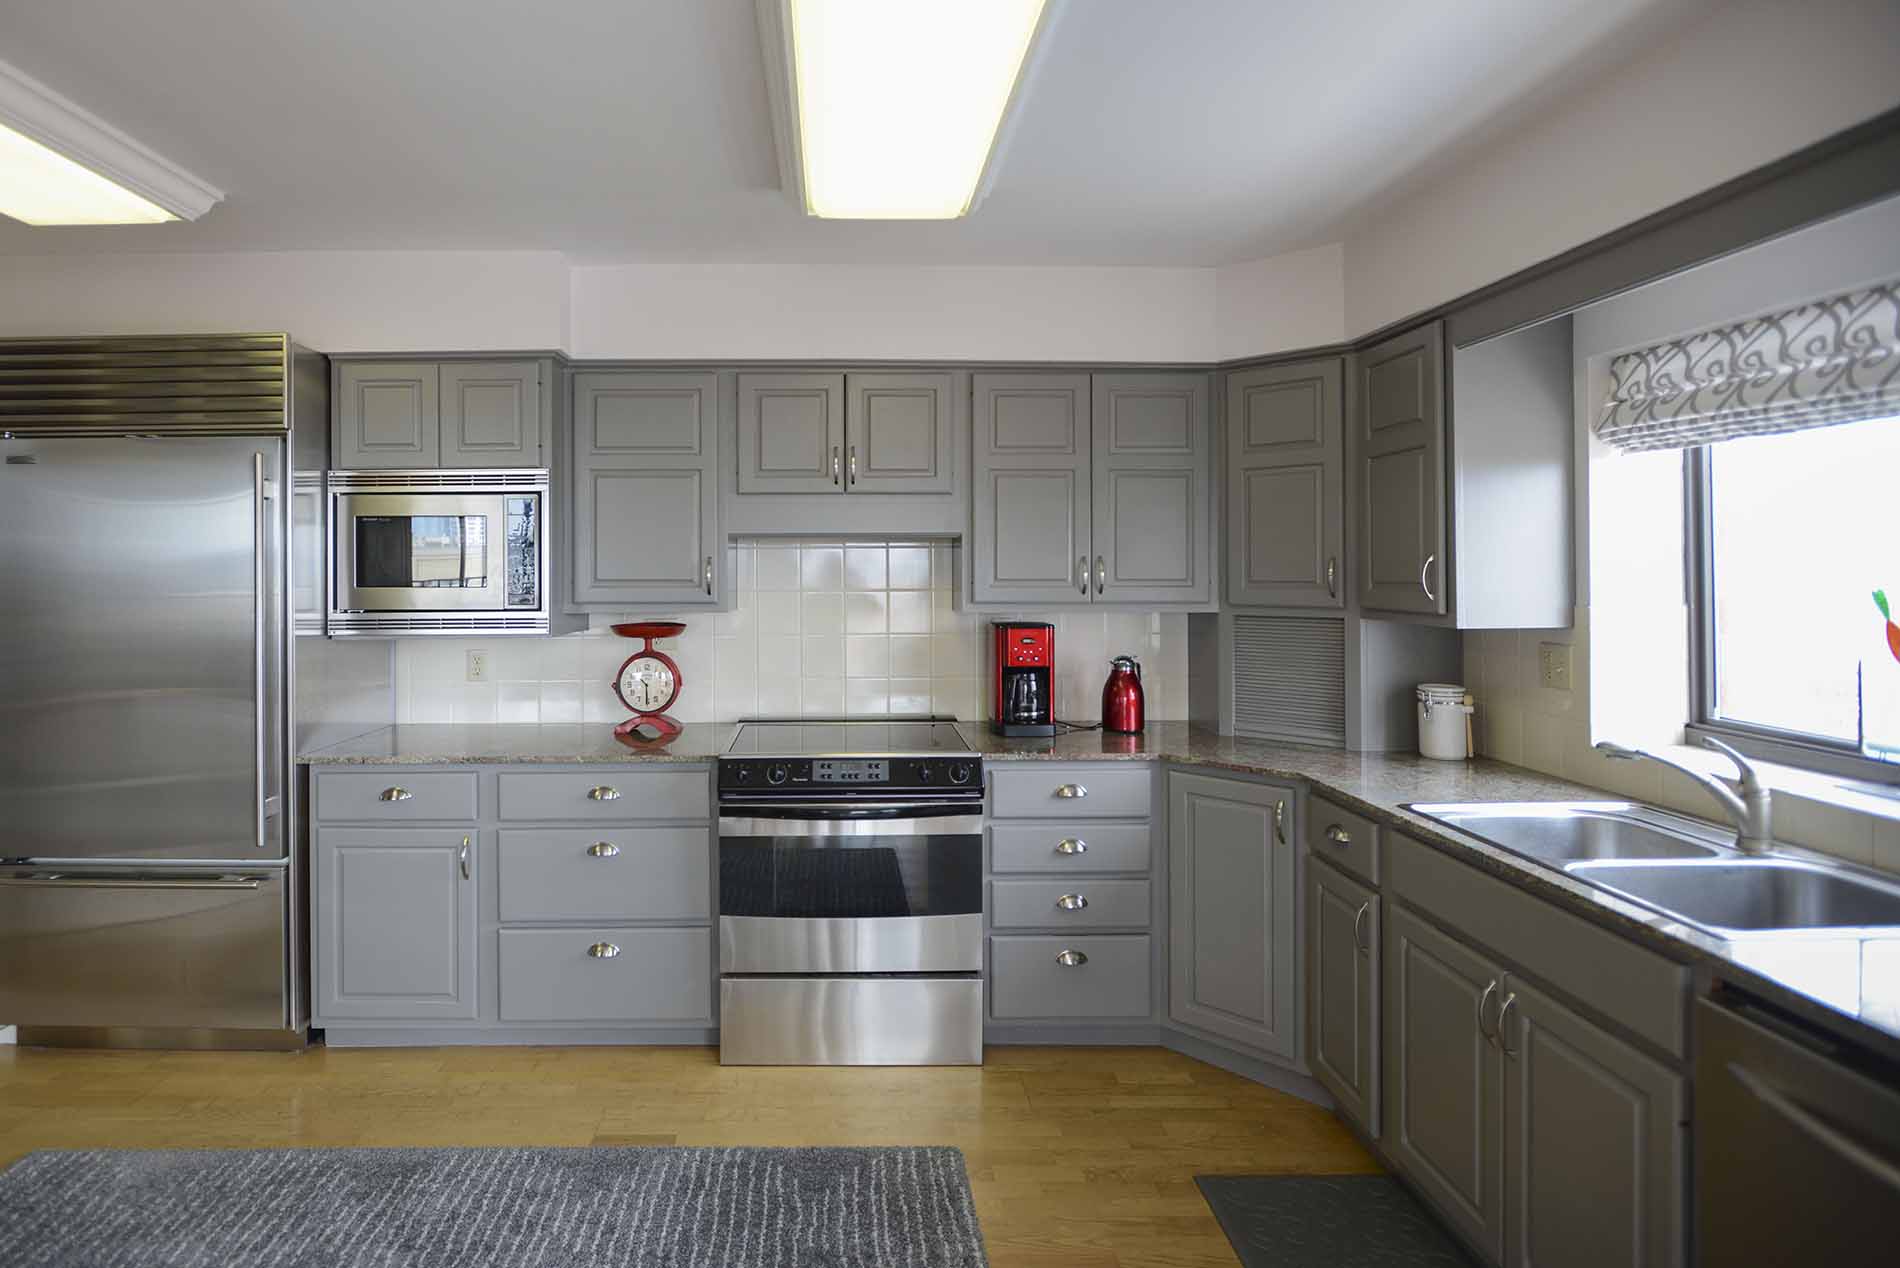 The Cost of Professional Kitchen Cabinets